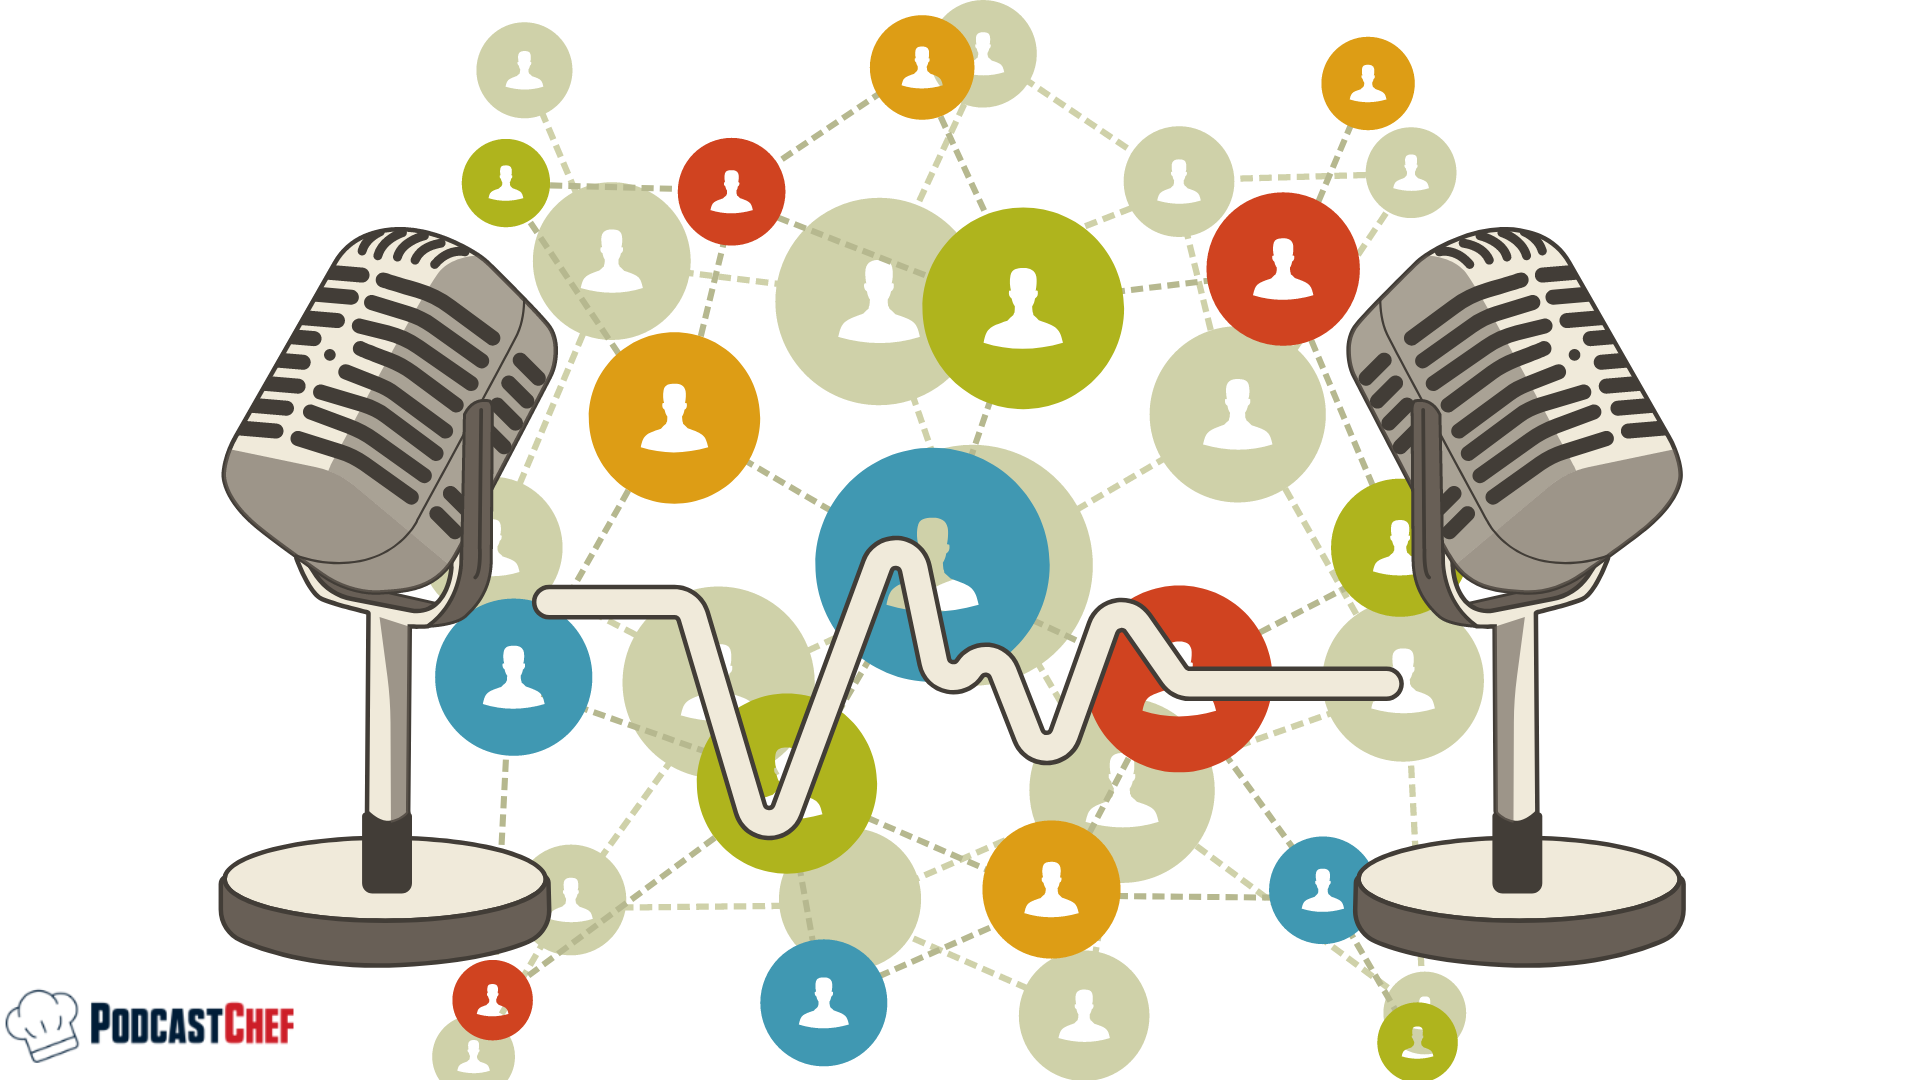 Measuring the impact of podcast by evaluating network growth